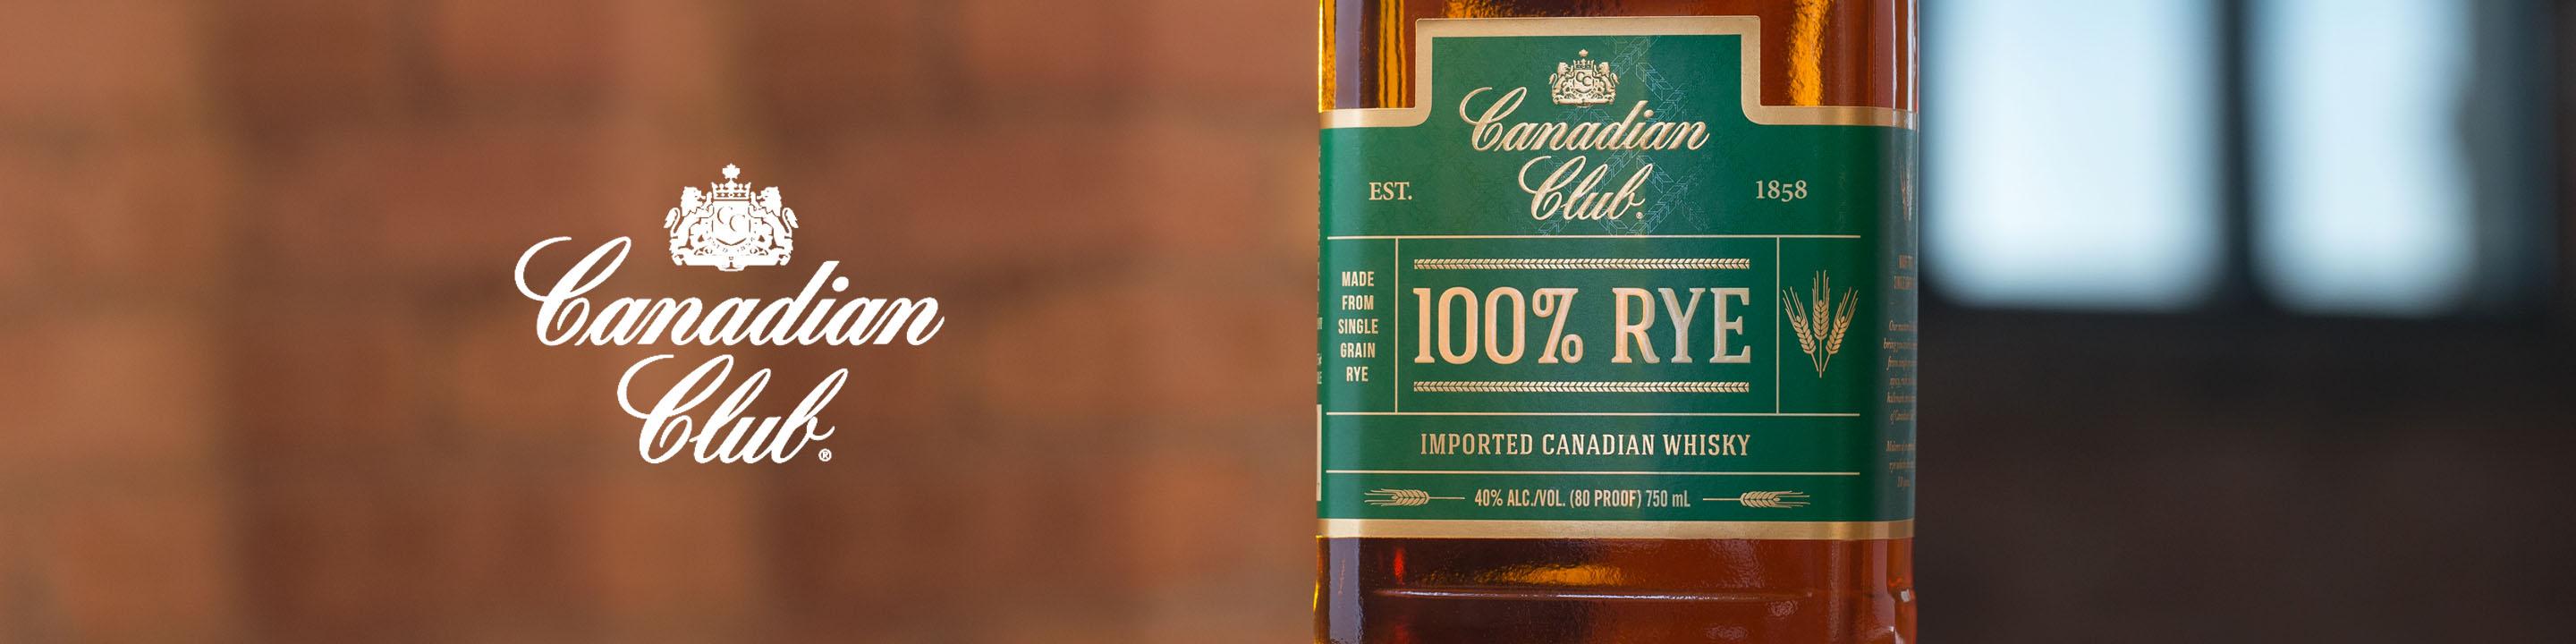 For more than 150 years, Canadian Club has been known worldwide as smooth, versatile and easy to enjoy. Buy Canadian Club online now from nearby liquor stores via Minibar Delivery. 